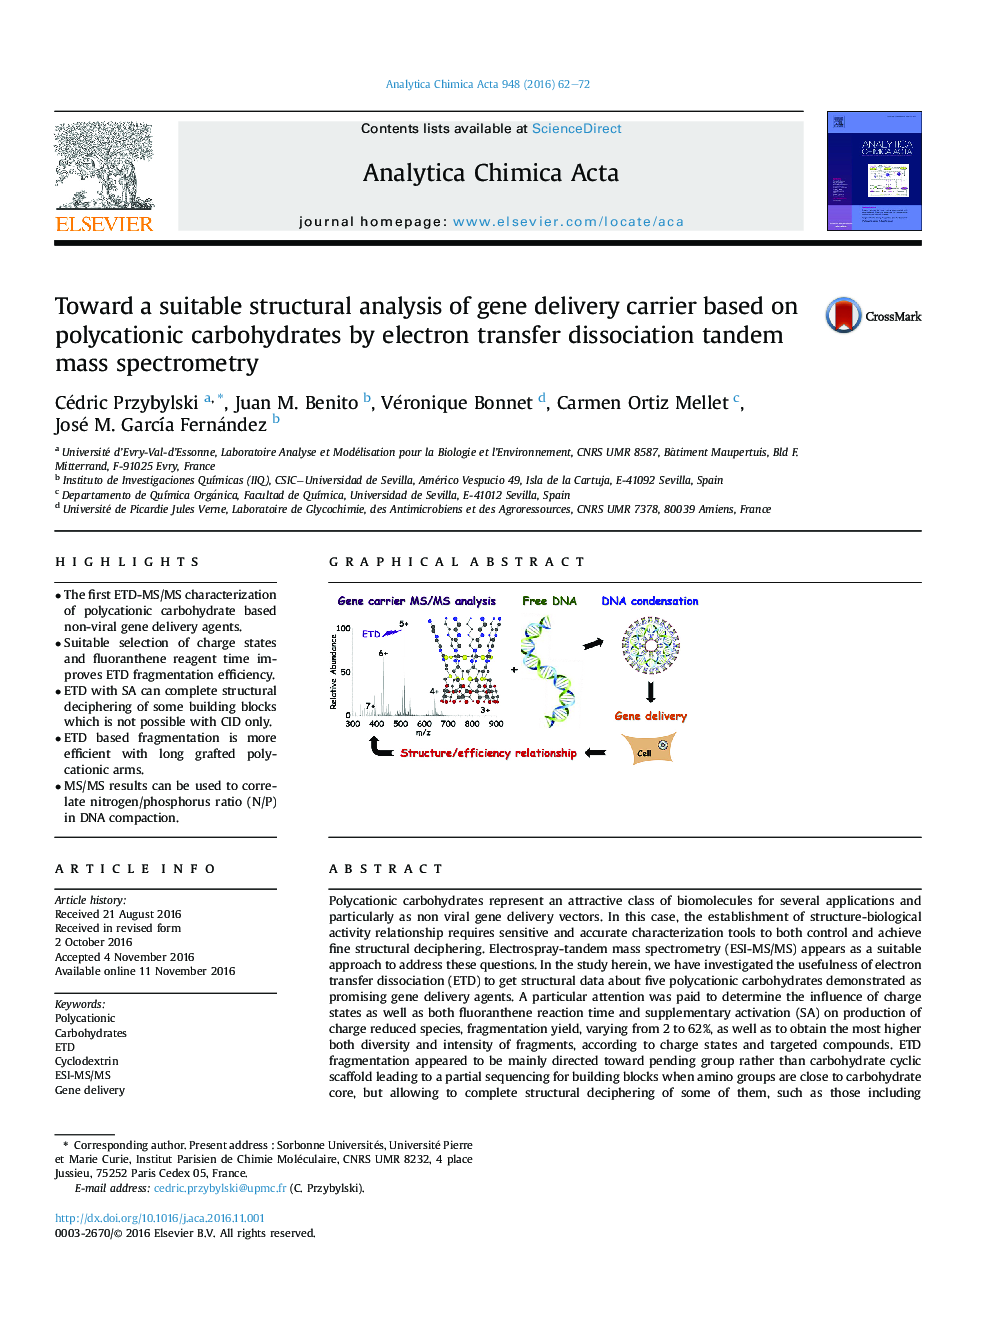 Toward a suitable structural analysis of gene delivery carrier based on polycationic carbohydrates by electron transfer dissociation tandem mass spectrometry